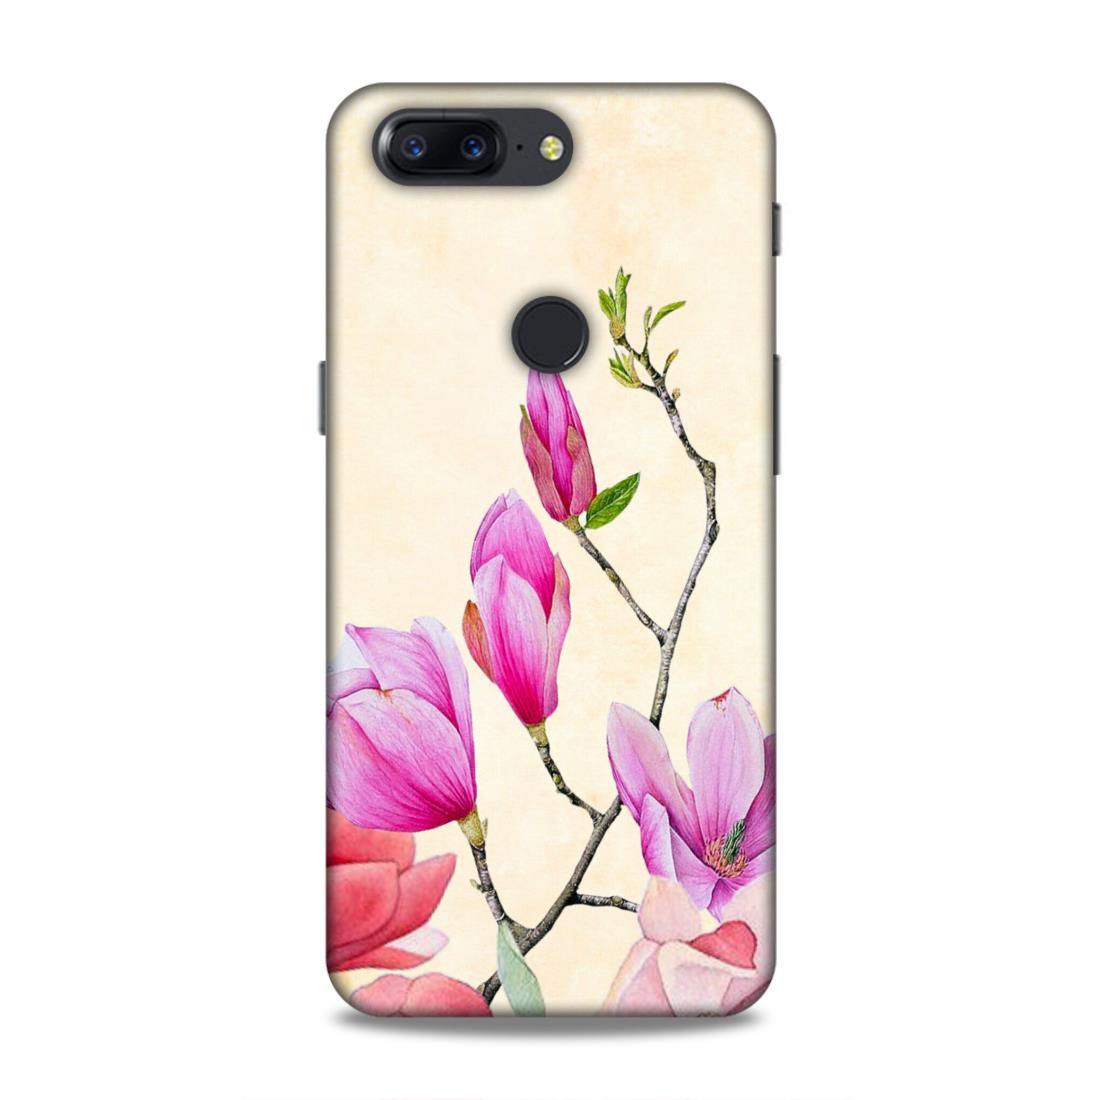 Pink Flower OnePlus 5T Mobile Cover Case